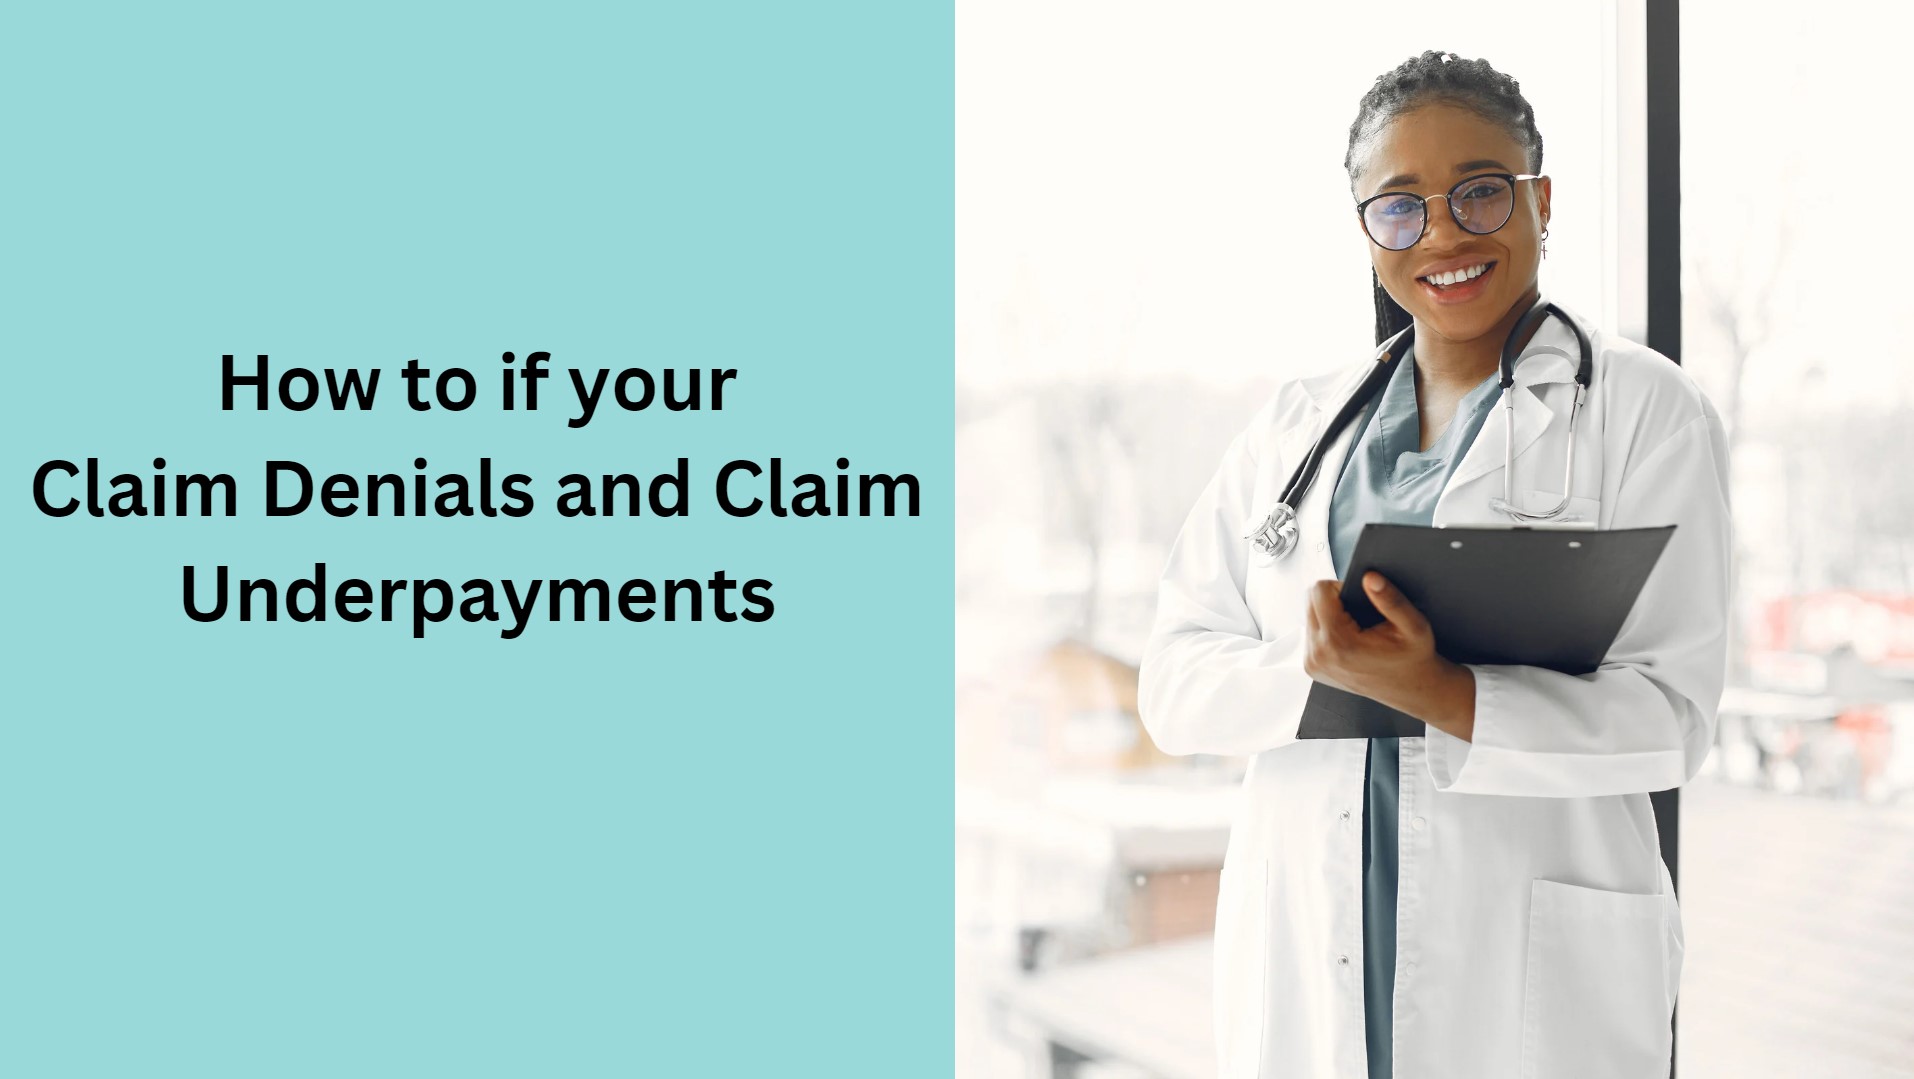 Claim Denials and Claim Underpayments